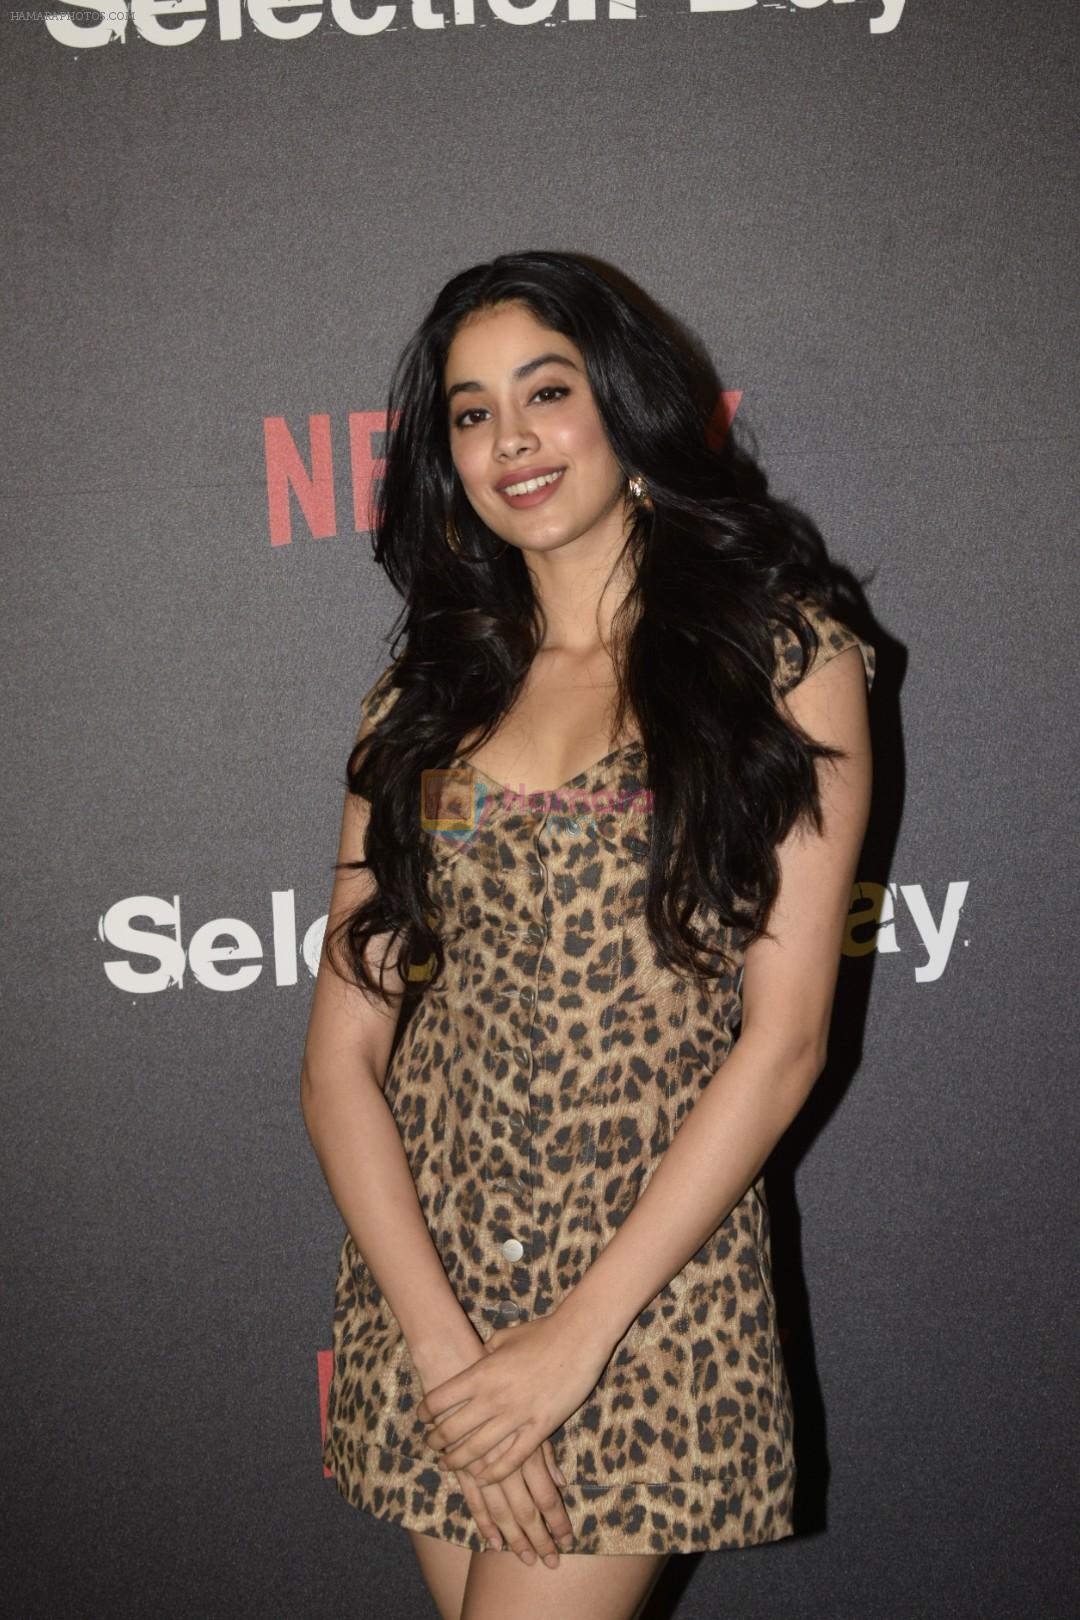 Janhvi Kapoor at the Red Carpet of Netfix Upcoming Series Selection Day on 18th Dec 2018